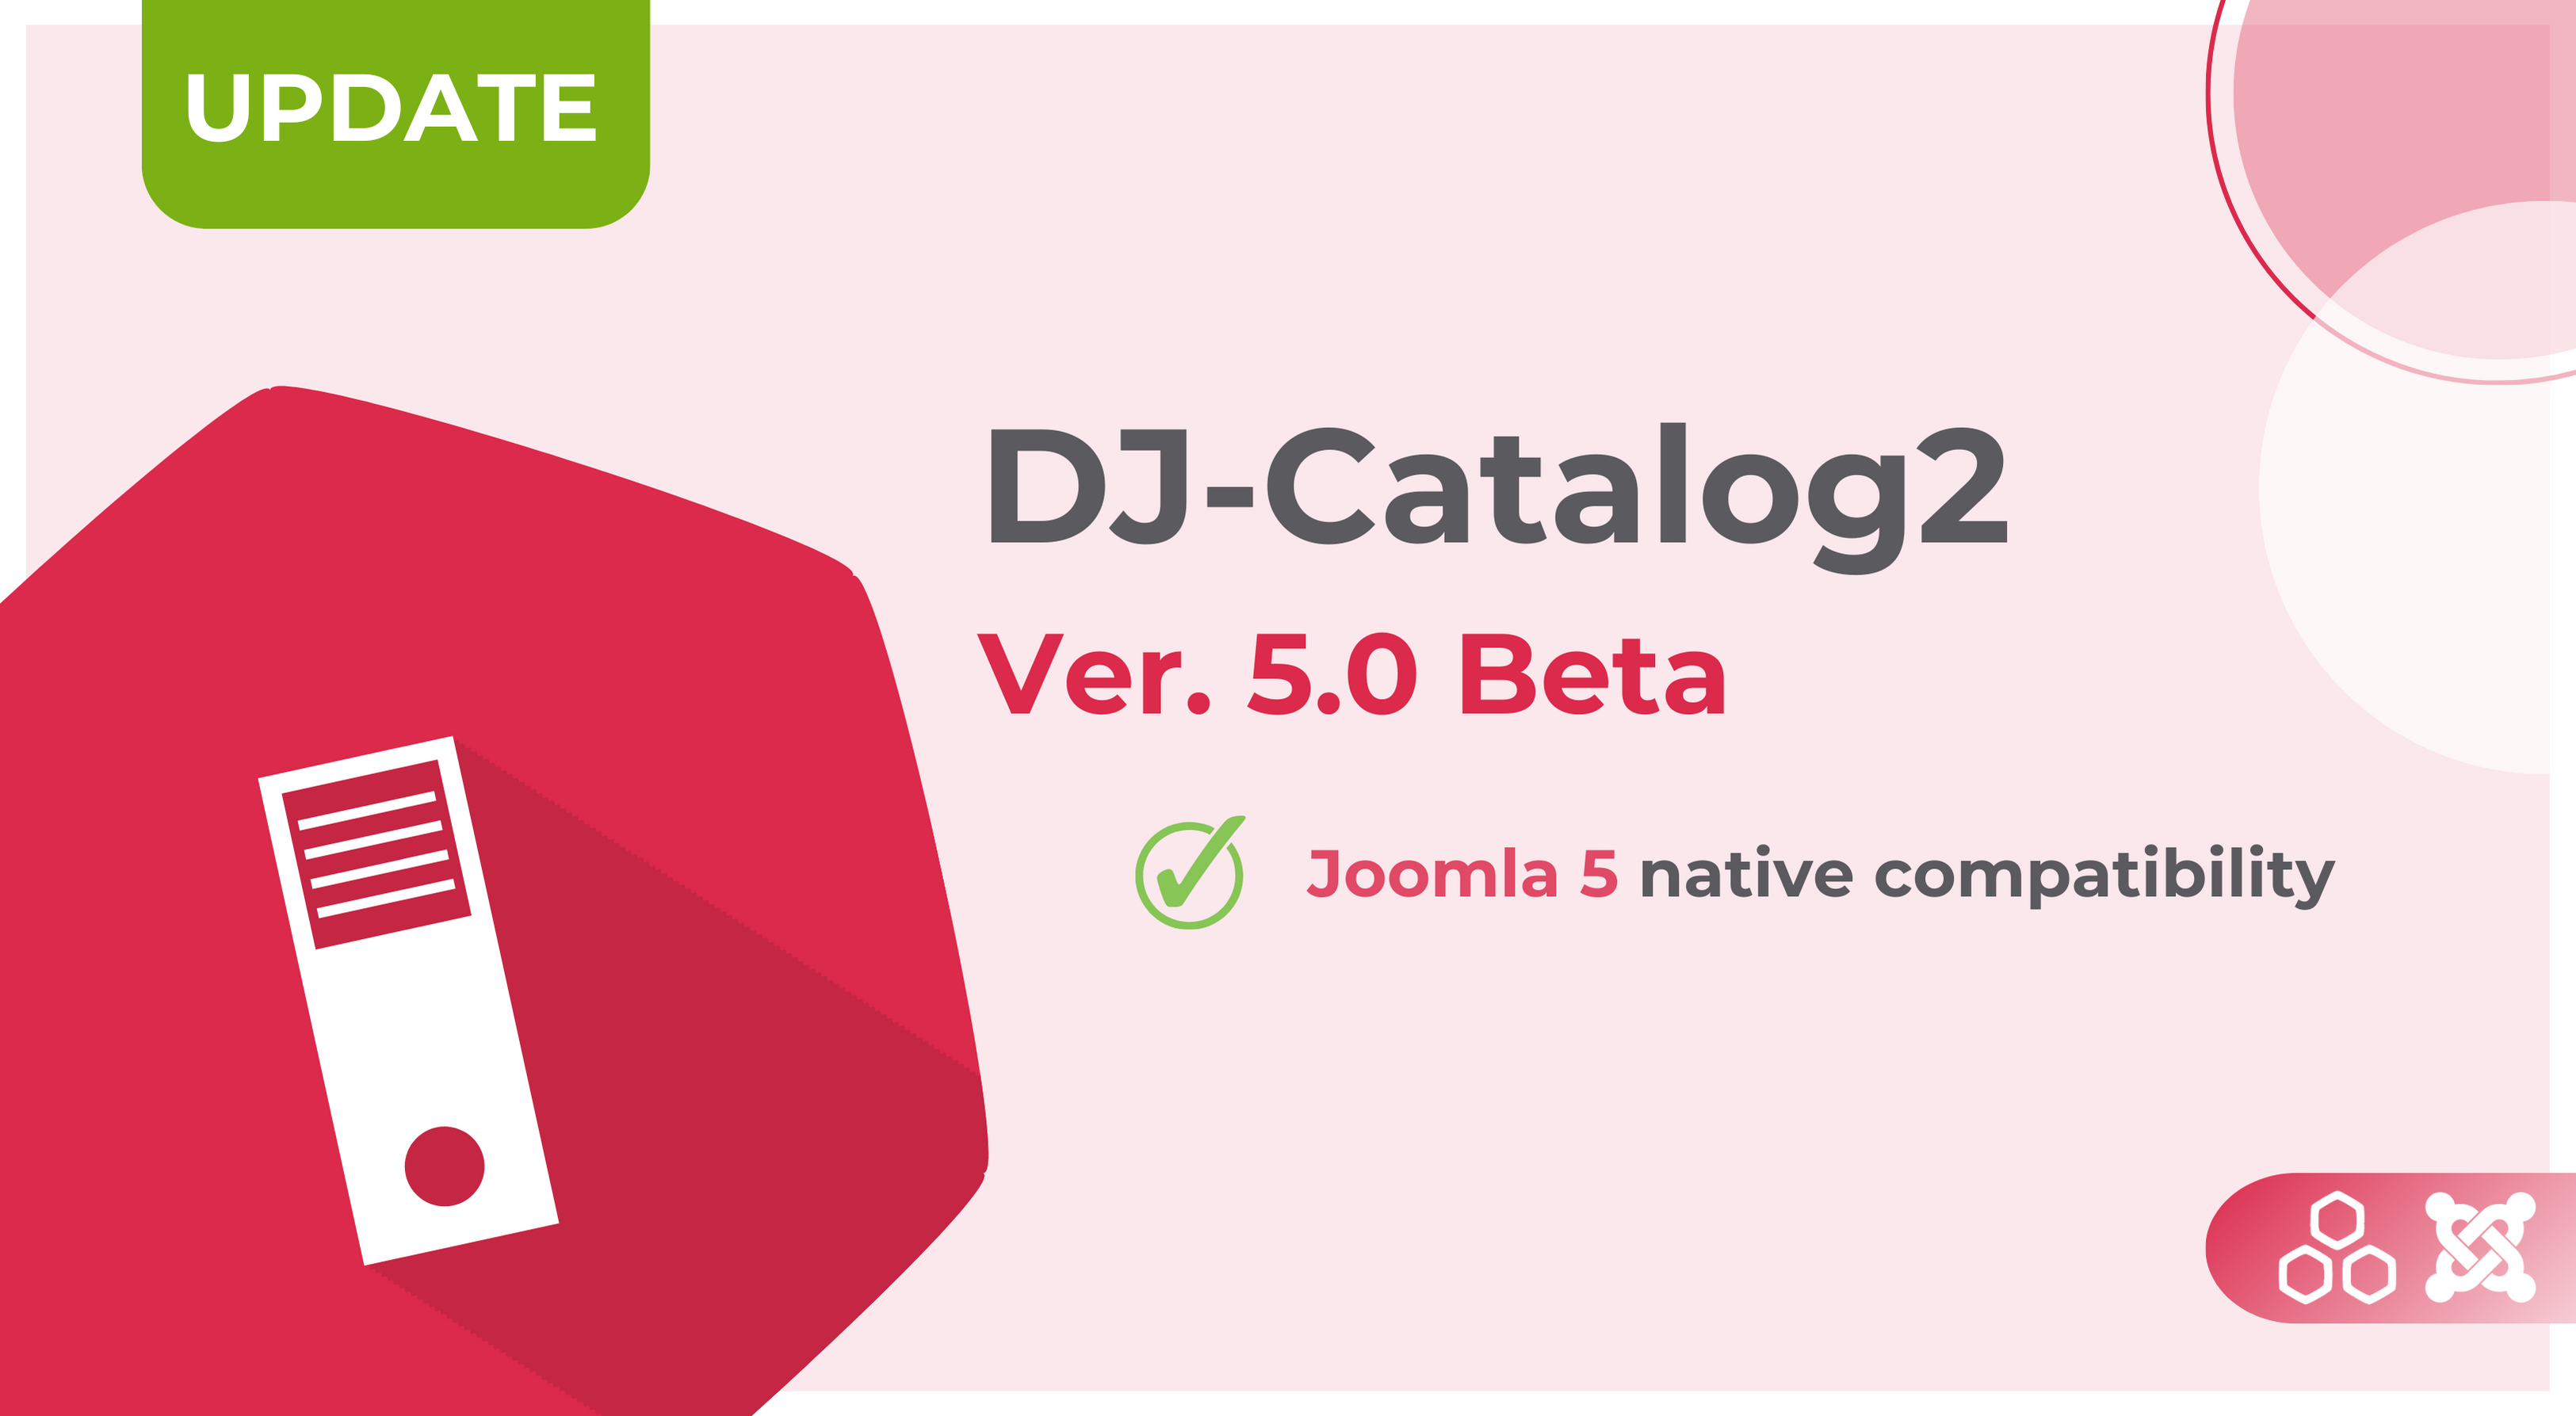 Exciting News for Joomla Users: DJ-Catalog2 Version 5.0 Beta Unveils Compatibility with Joomla 5